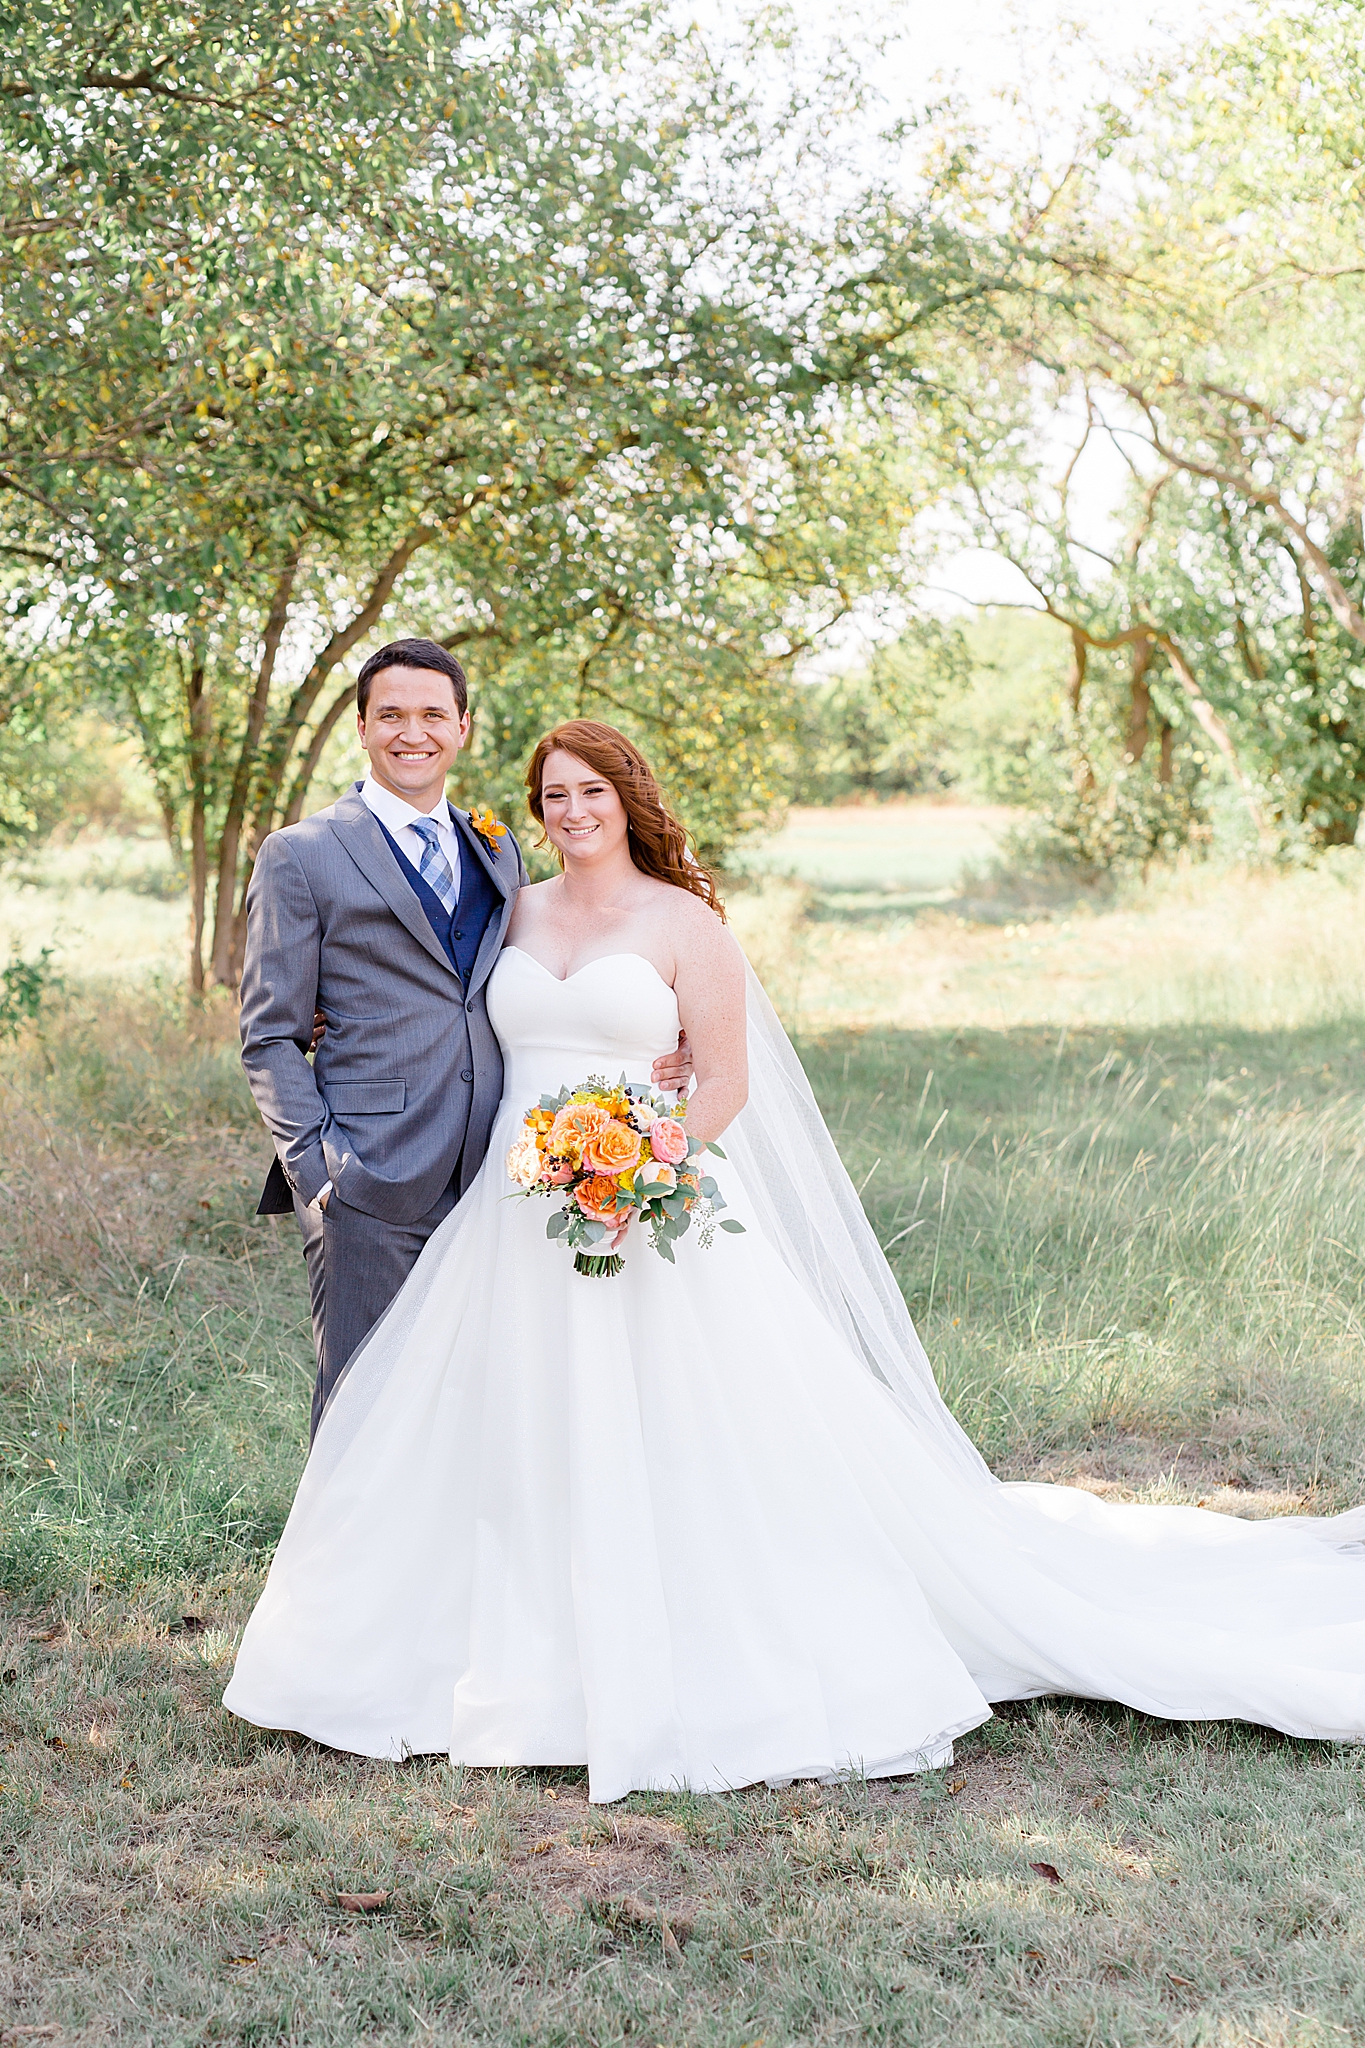 newlyweds pose in shade under tree